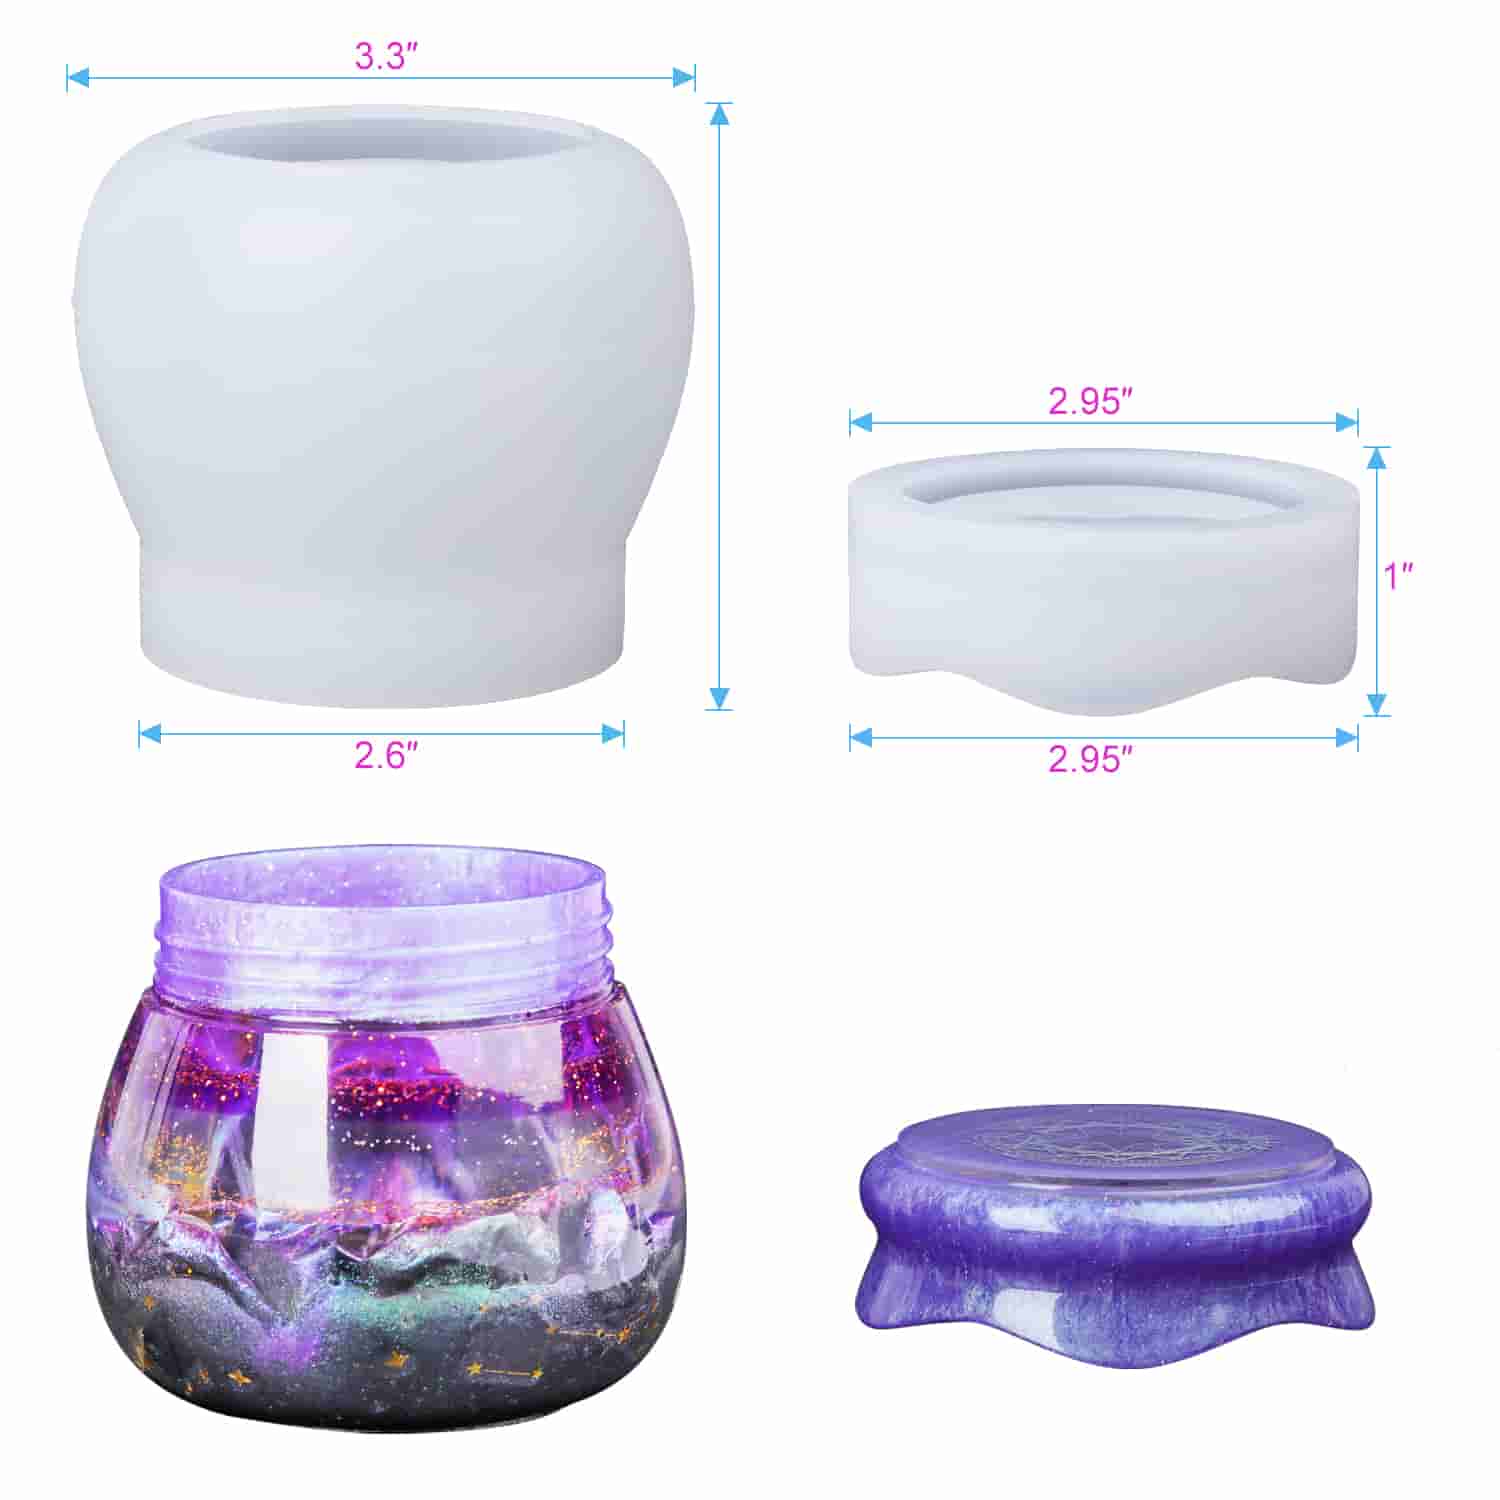 LET'S RESIN Resin Mold Silicone Kit with Resin Rolling Tray Mold, Ashtray  Resin Jar Mold with Lid for Casting Resin,Epoxy Resin,DIY Storage Container